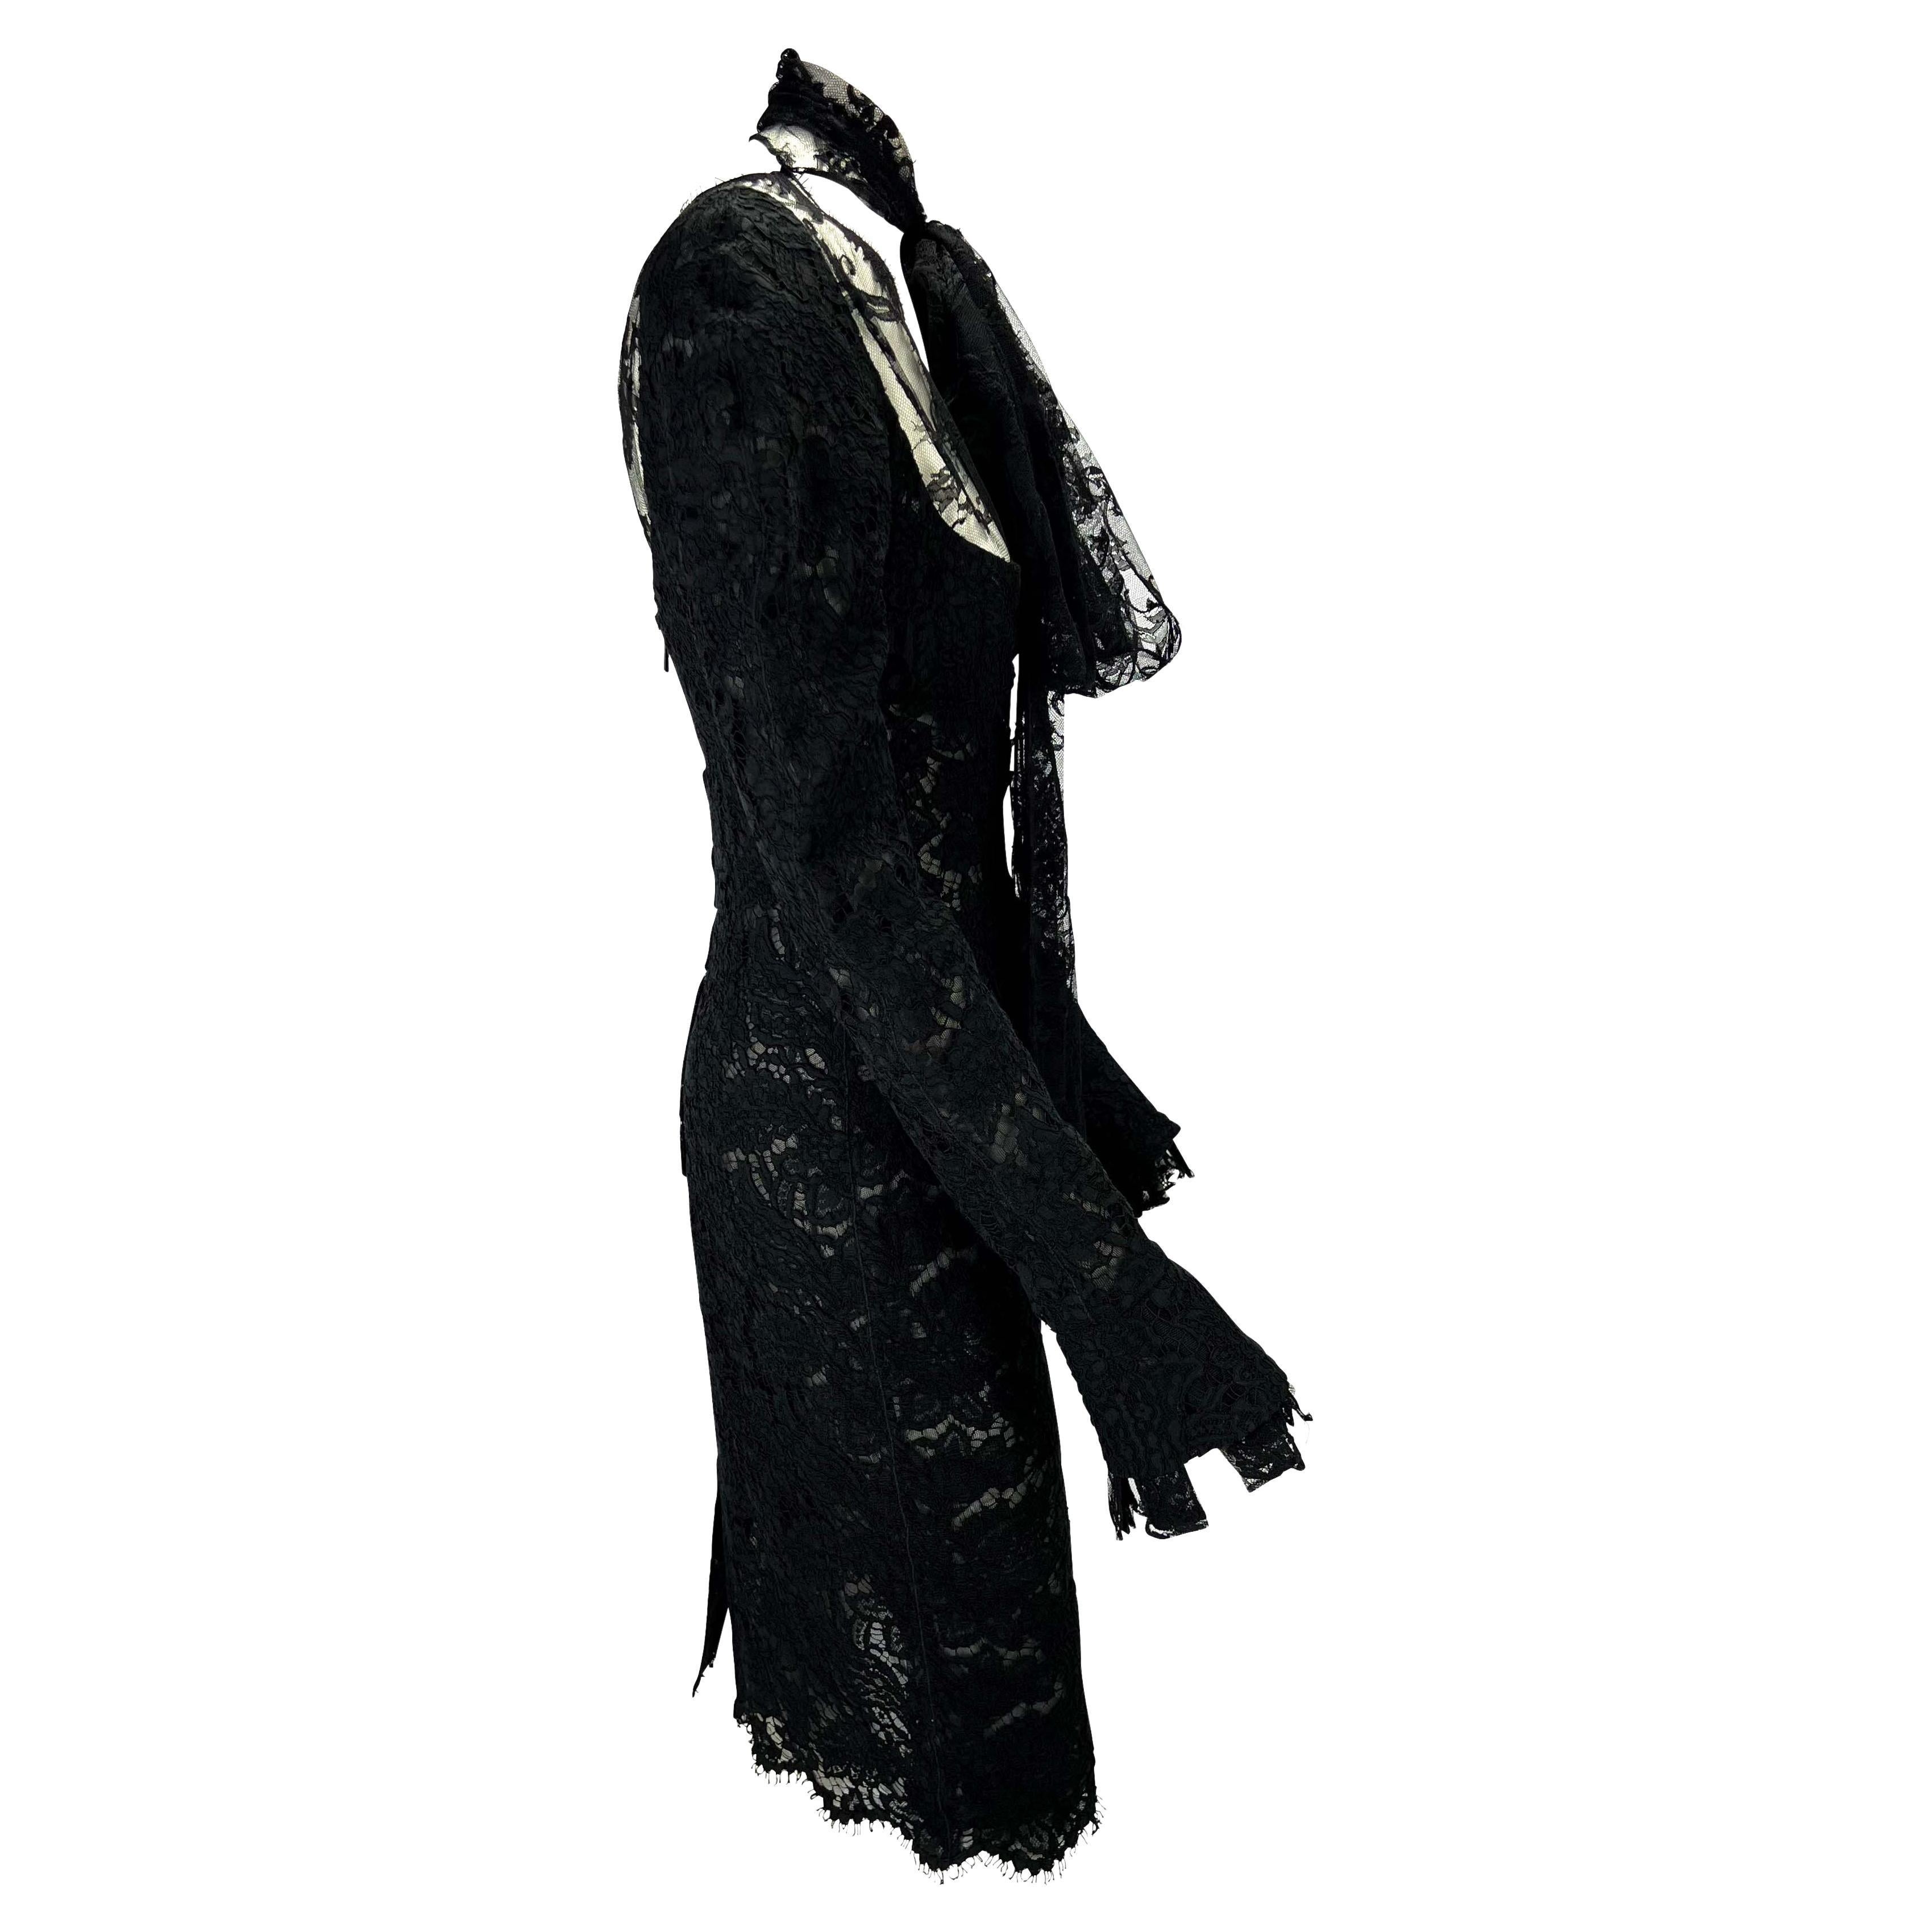 F/W 2002 Yves Saint Laurent by Tom Ford Runway Sheer Black Lace Poet's Dress For Sale 2